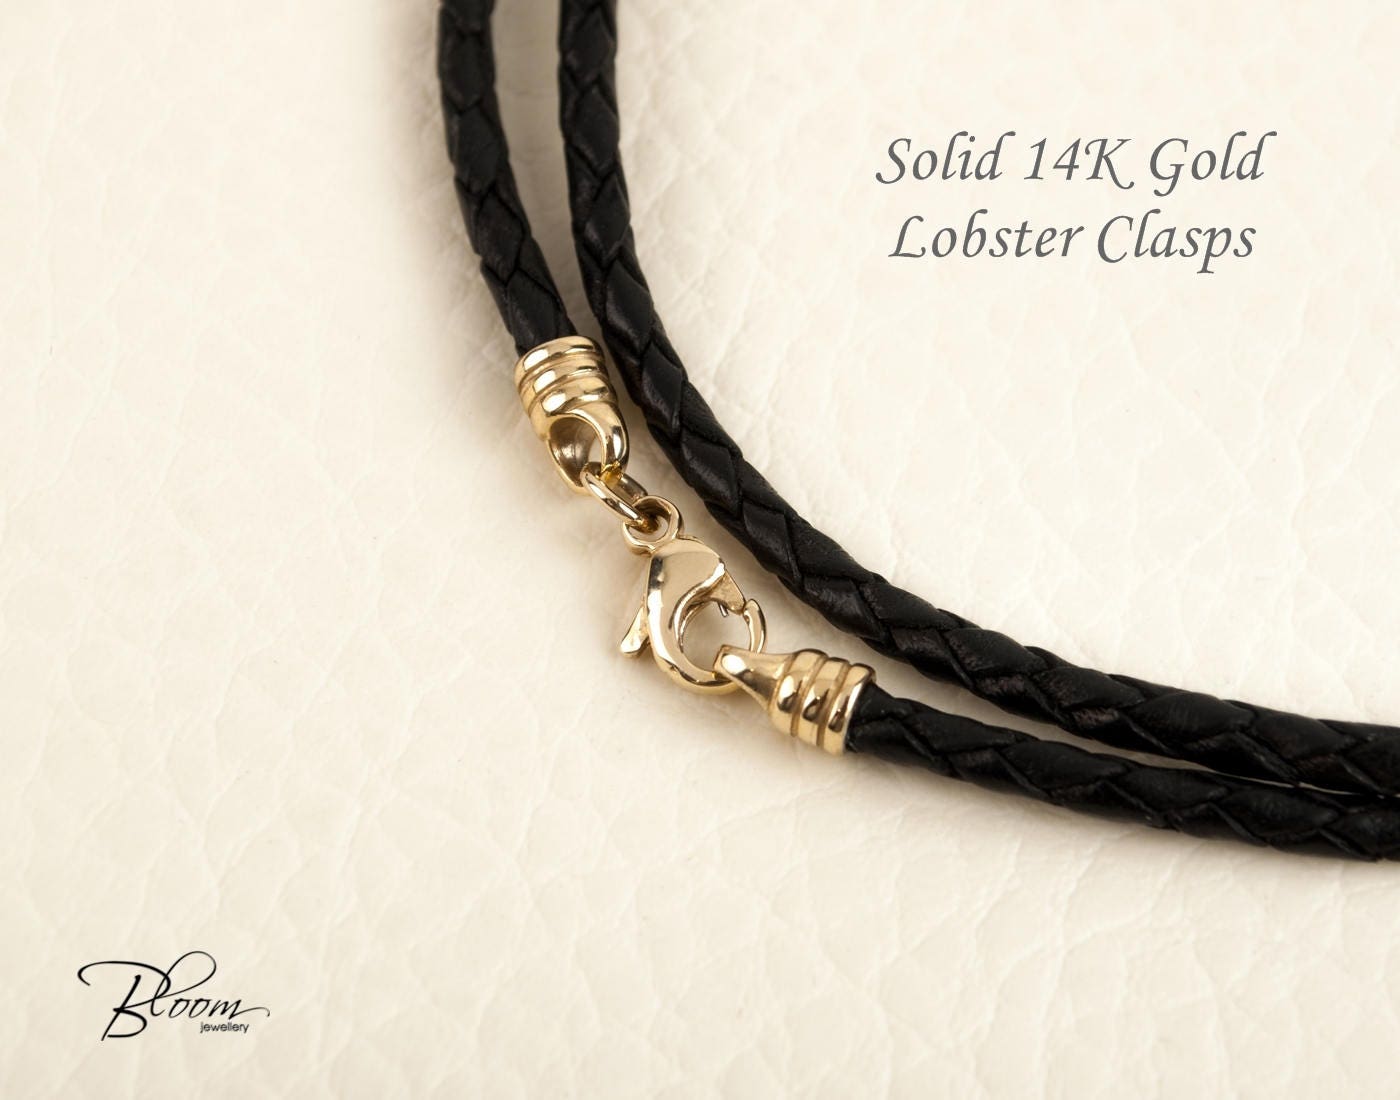 Black cord with 14K gold clasp to use as necklace, necklaces, rope